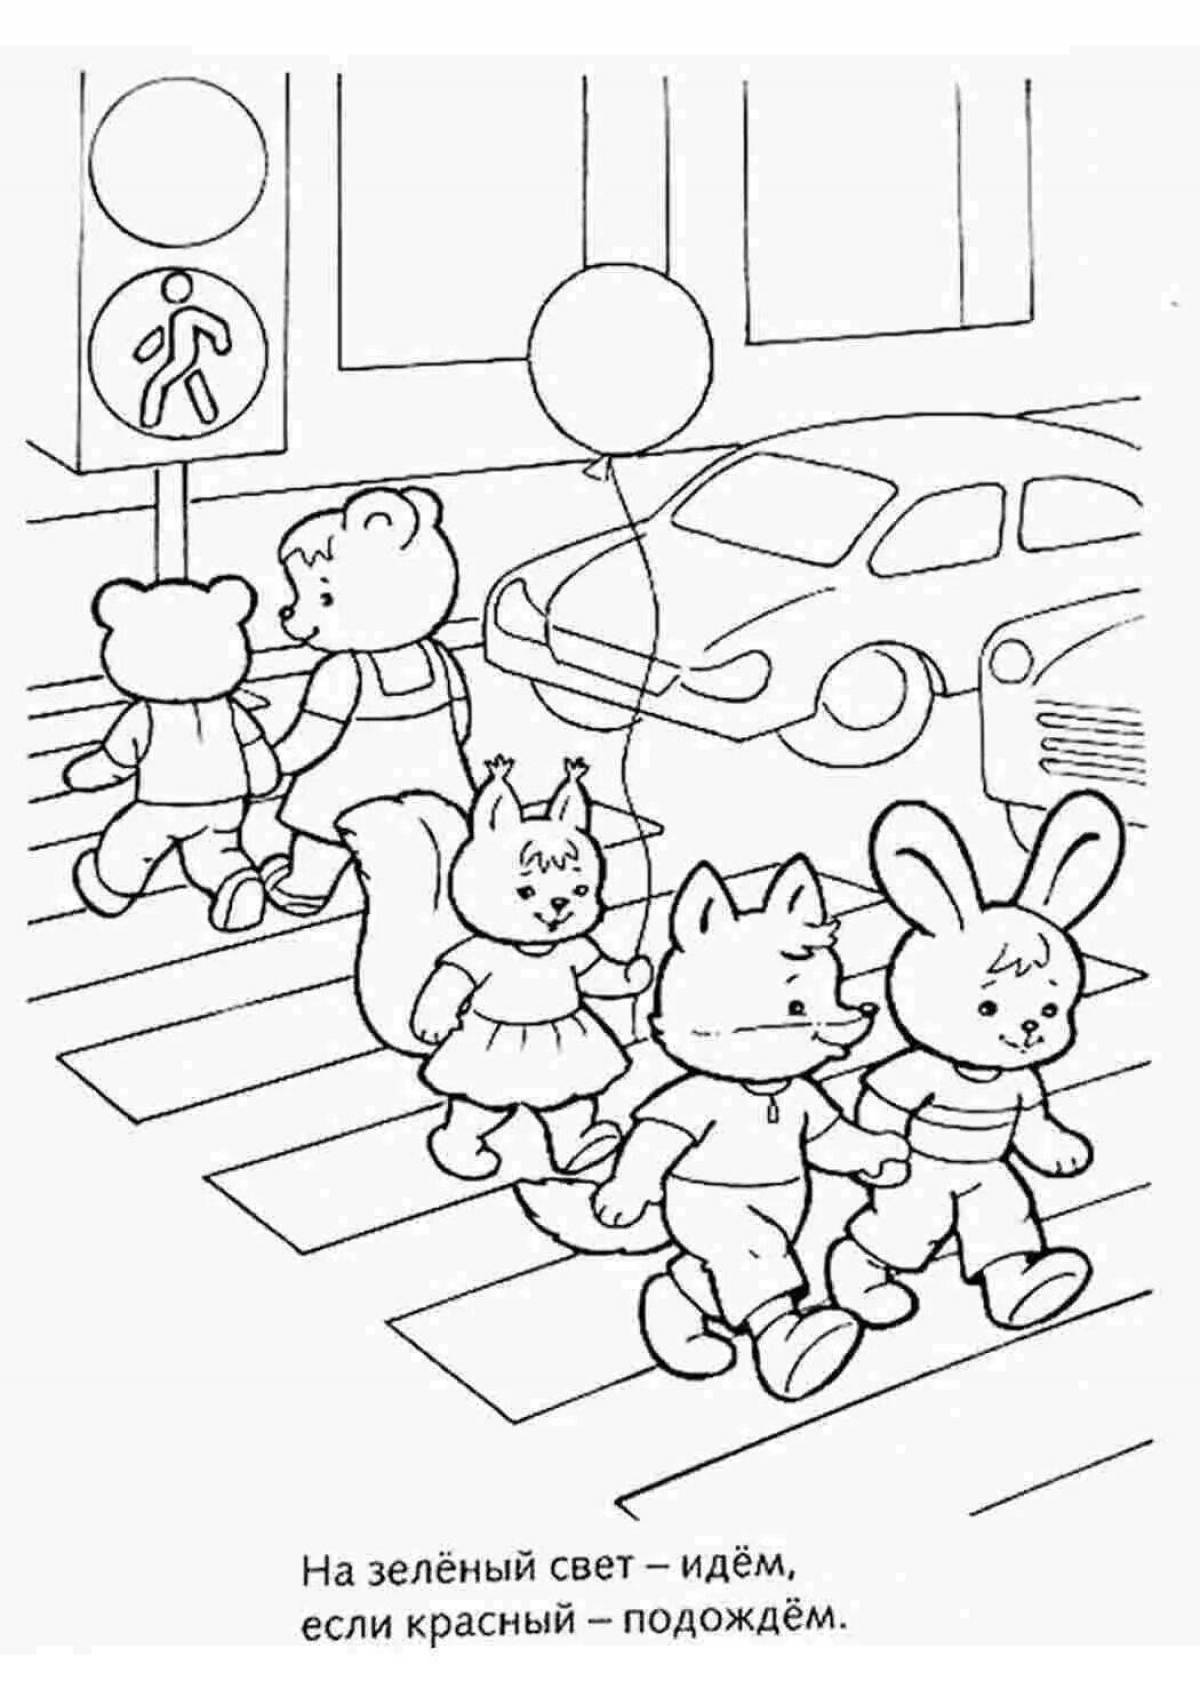 Animated crossroads coloring page